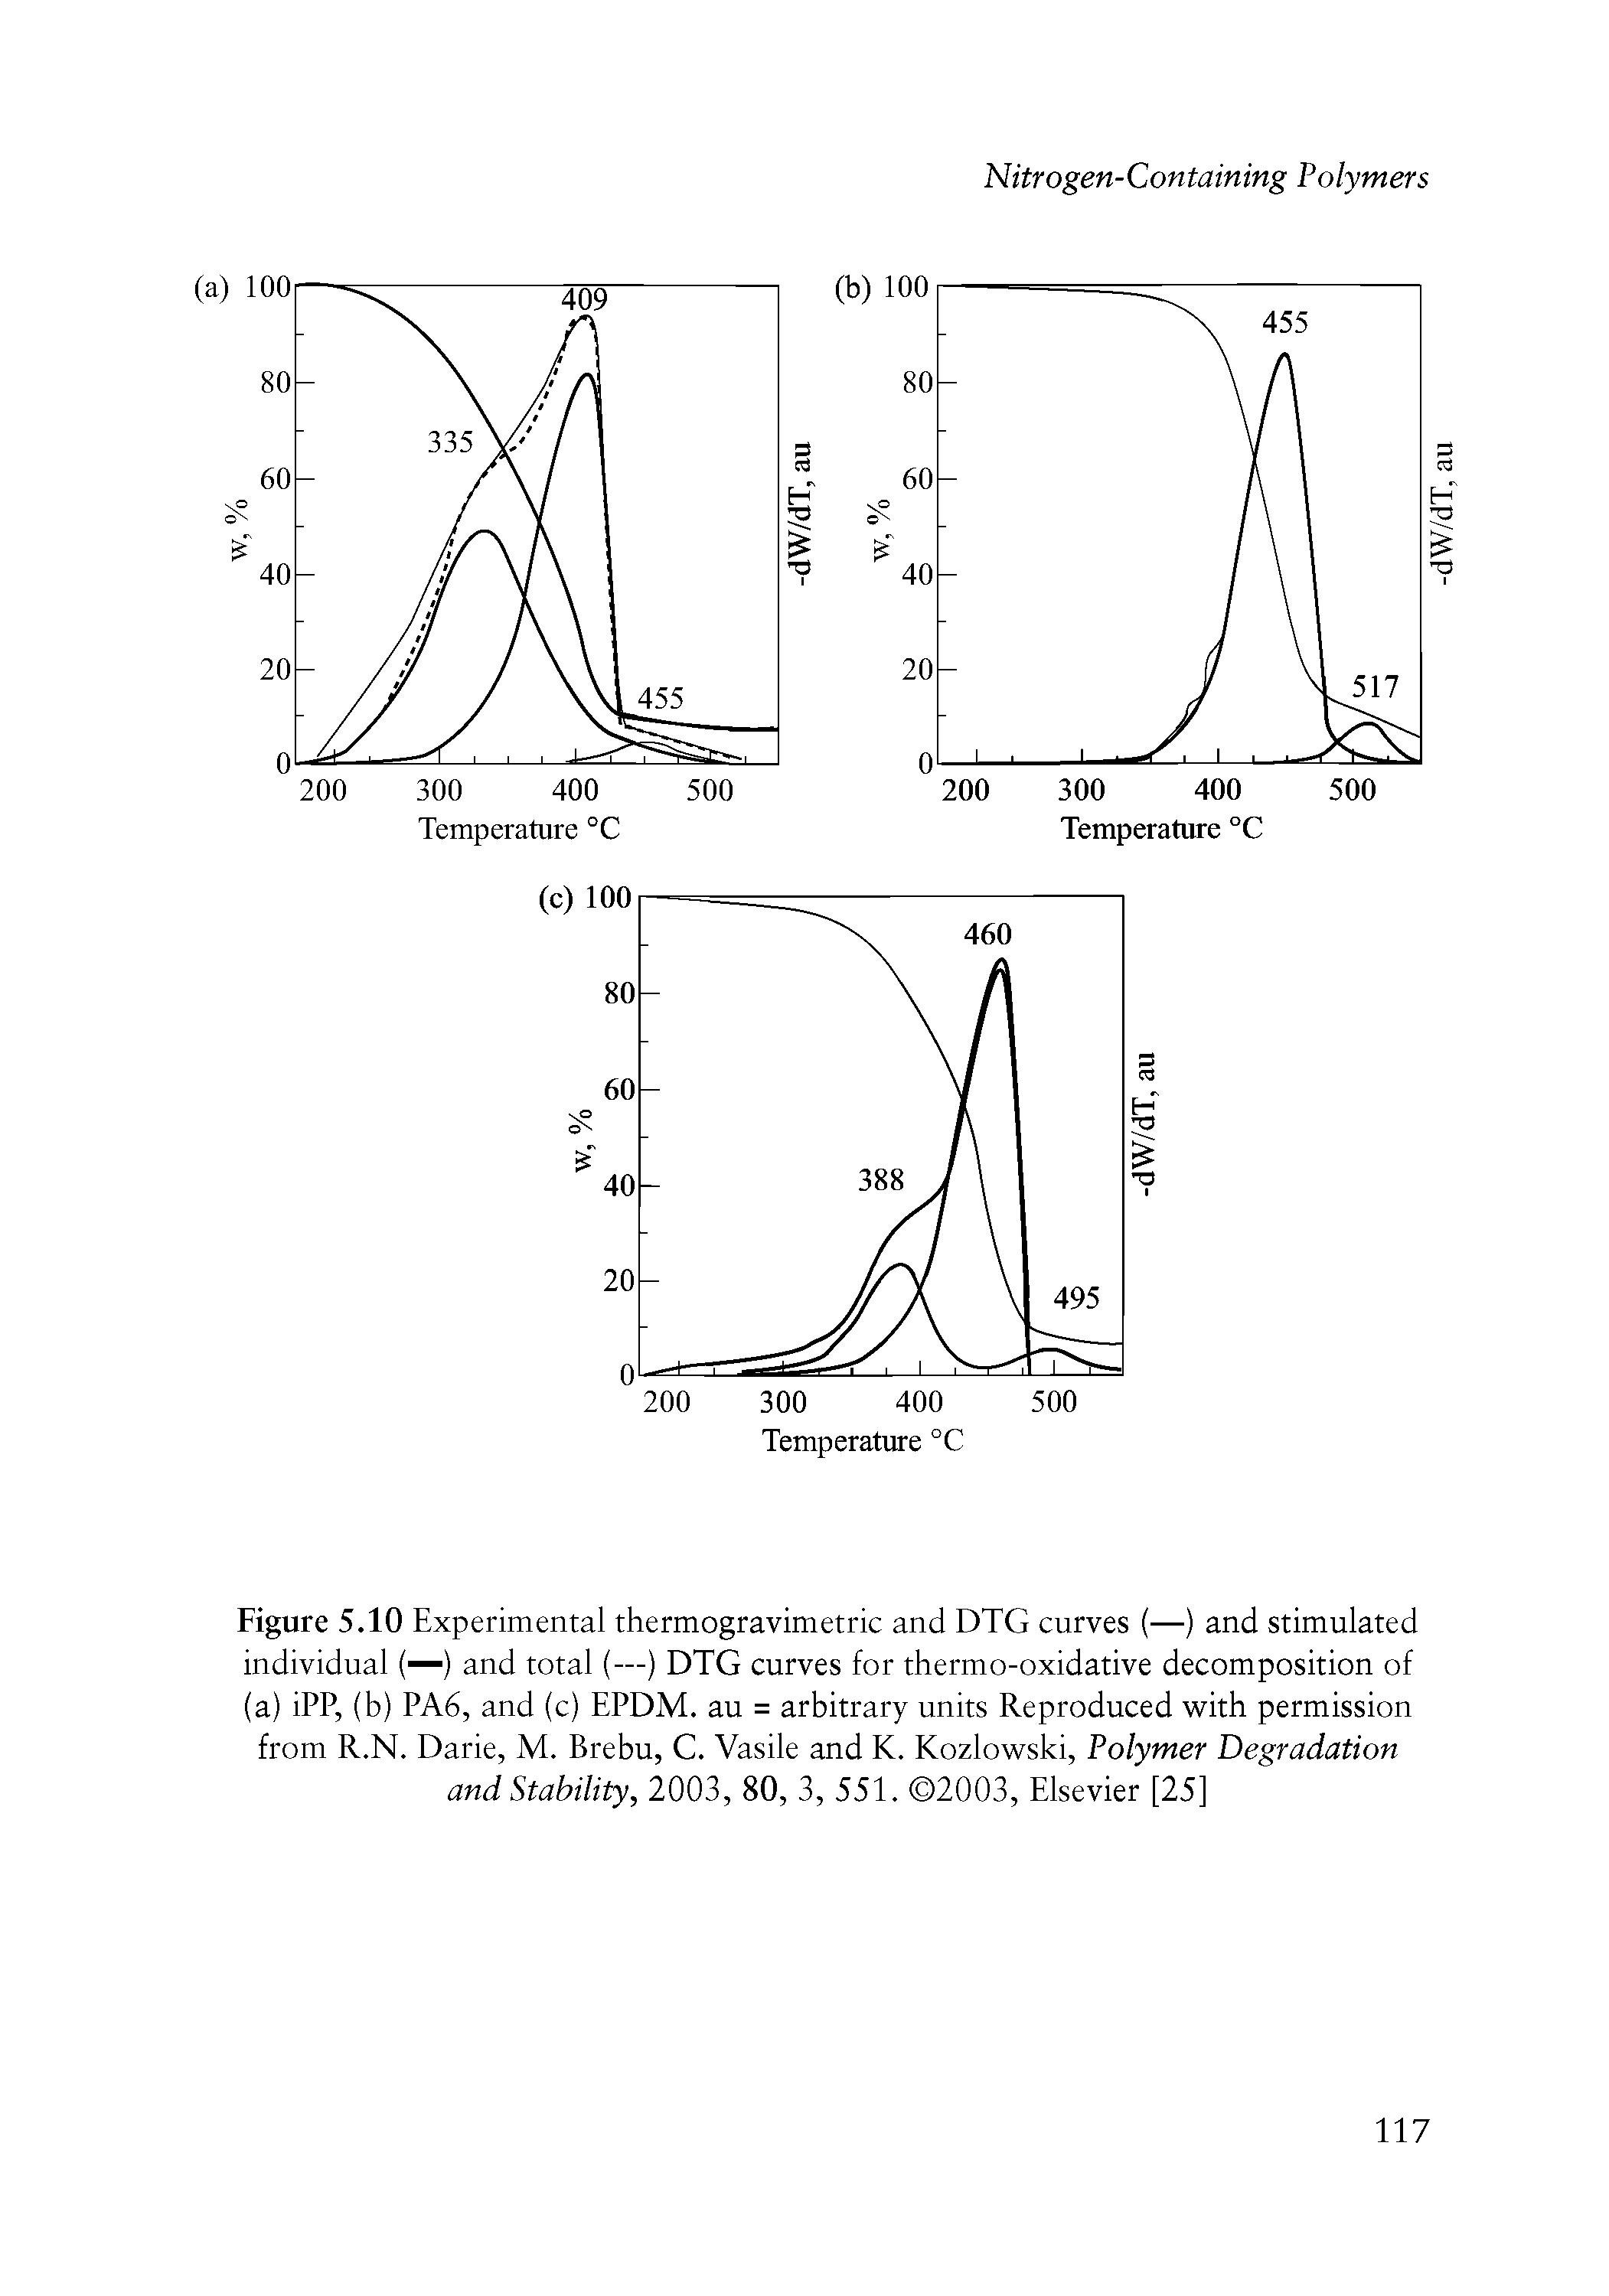 Figure 5.10 Experimental thermogravimetric and DTG curves (—) and stimulated individual (—) and total (—) DTG curves for thermo-oxidative decomposition of (a) iPP, (b) PA6, and (c) EPDM. au = arbitrary units Reproduced with permission from R.N. Darie, M. Brebu, C. Vasile and K. Kozlowski, Polymer Degradation and Stability, 2003, 80, 3, 551. 2003, Elsevier [25]...